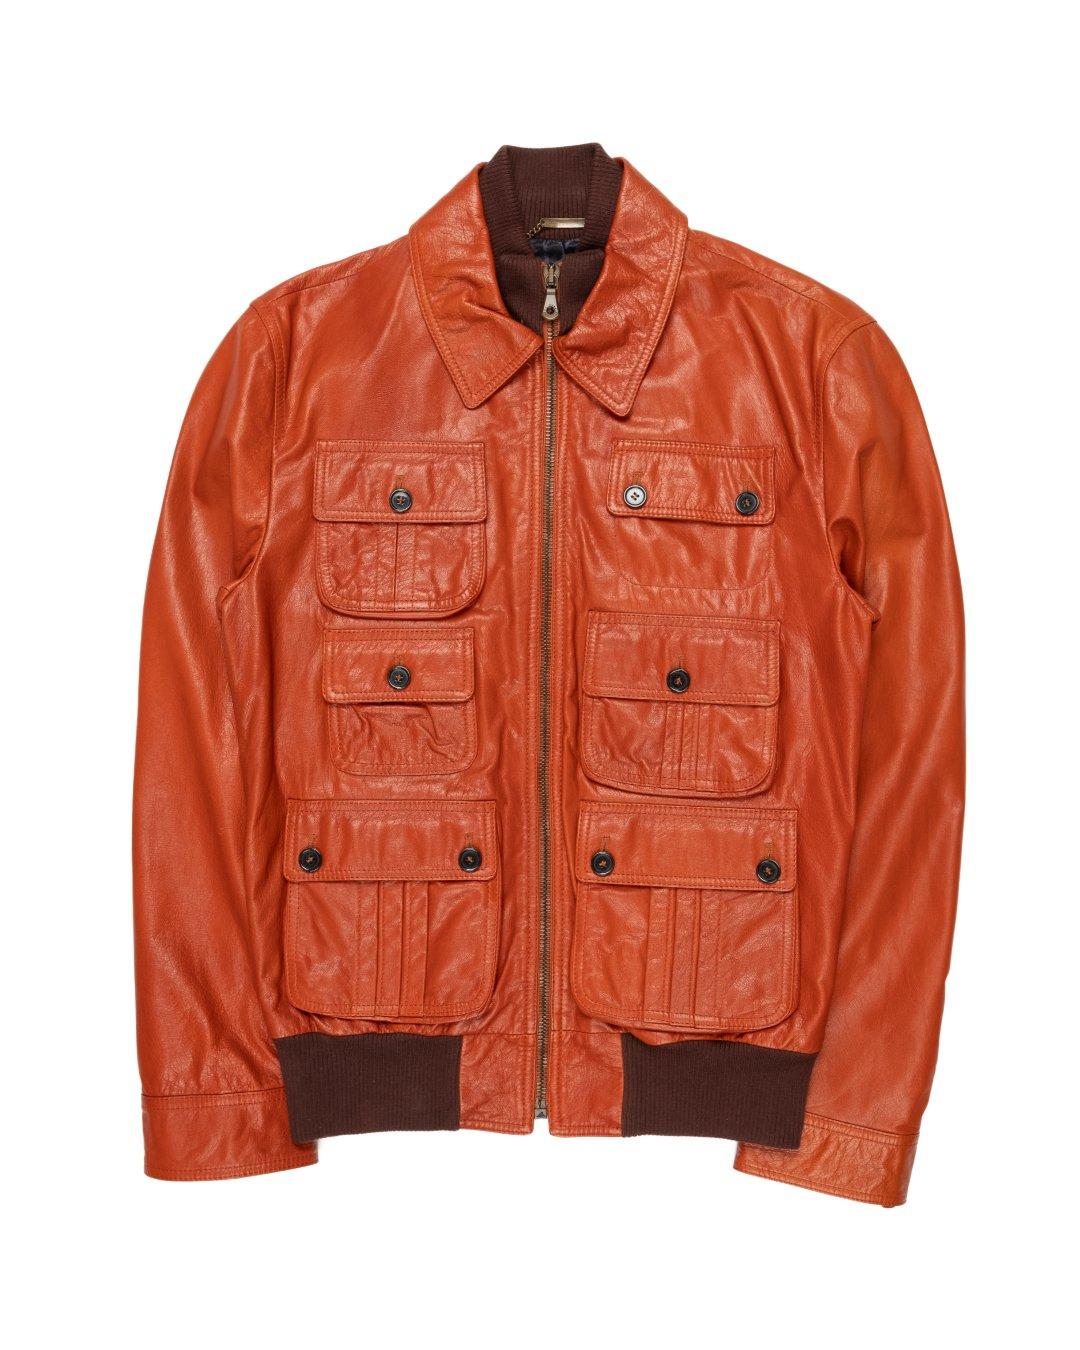 Dolce & Gabbana SS2006 Cargo Leather Jacket In Excellent Condition For Sale In Beverly Hills, CA